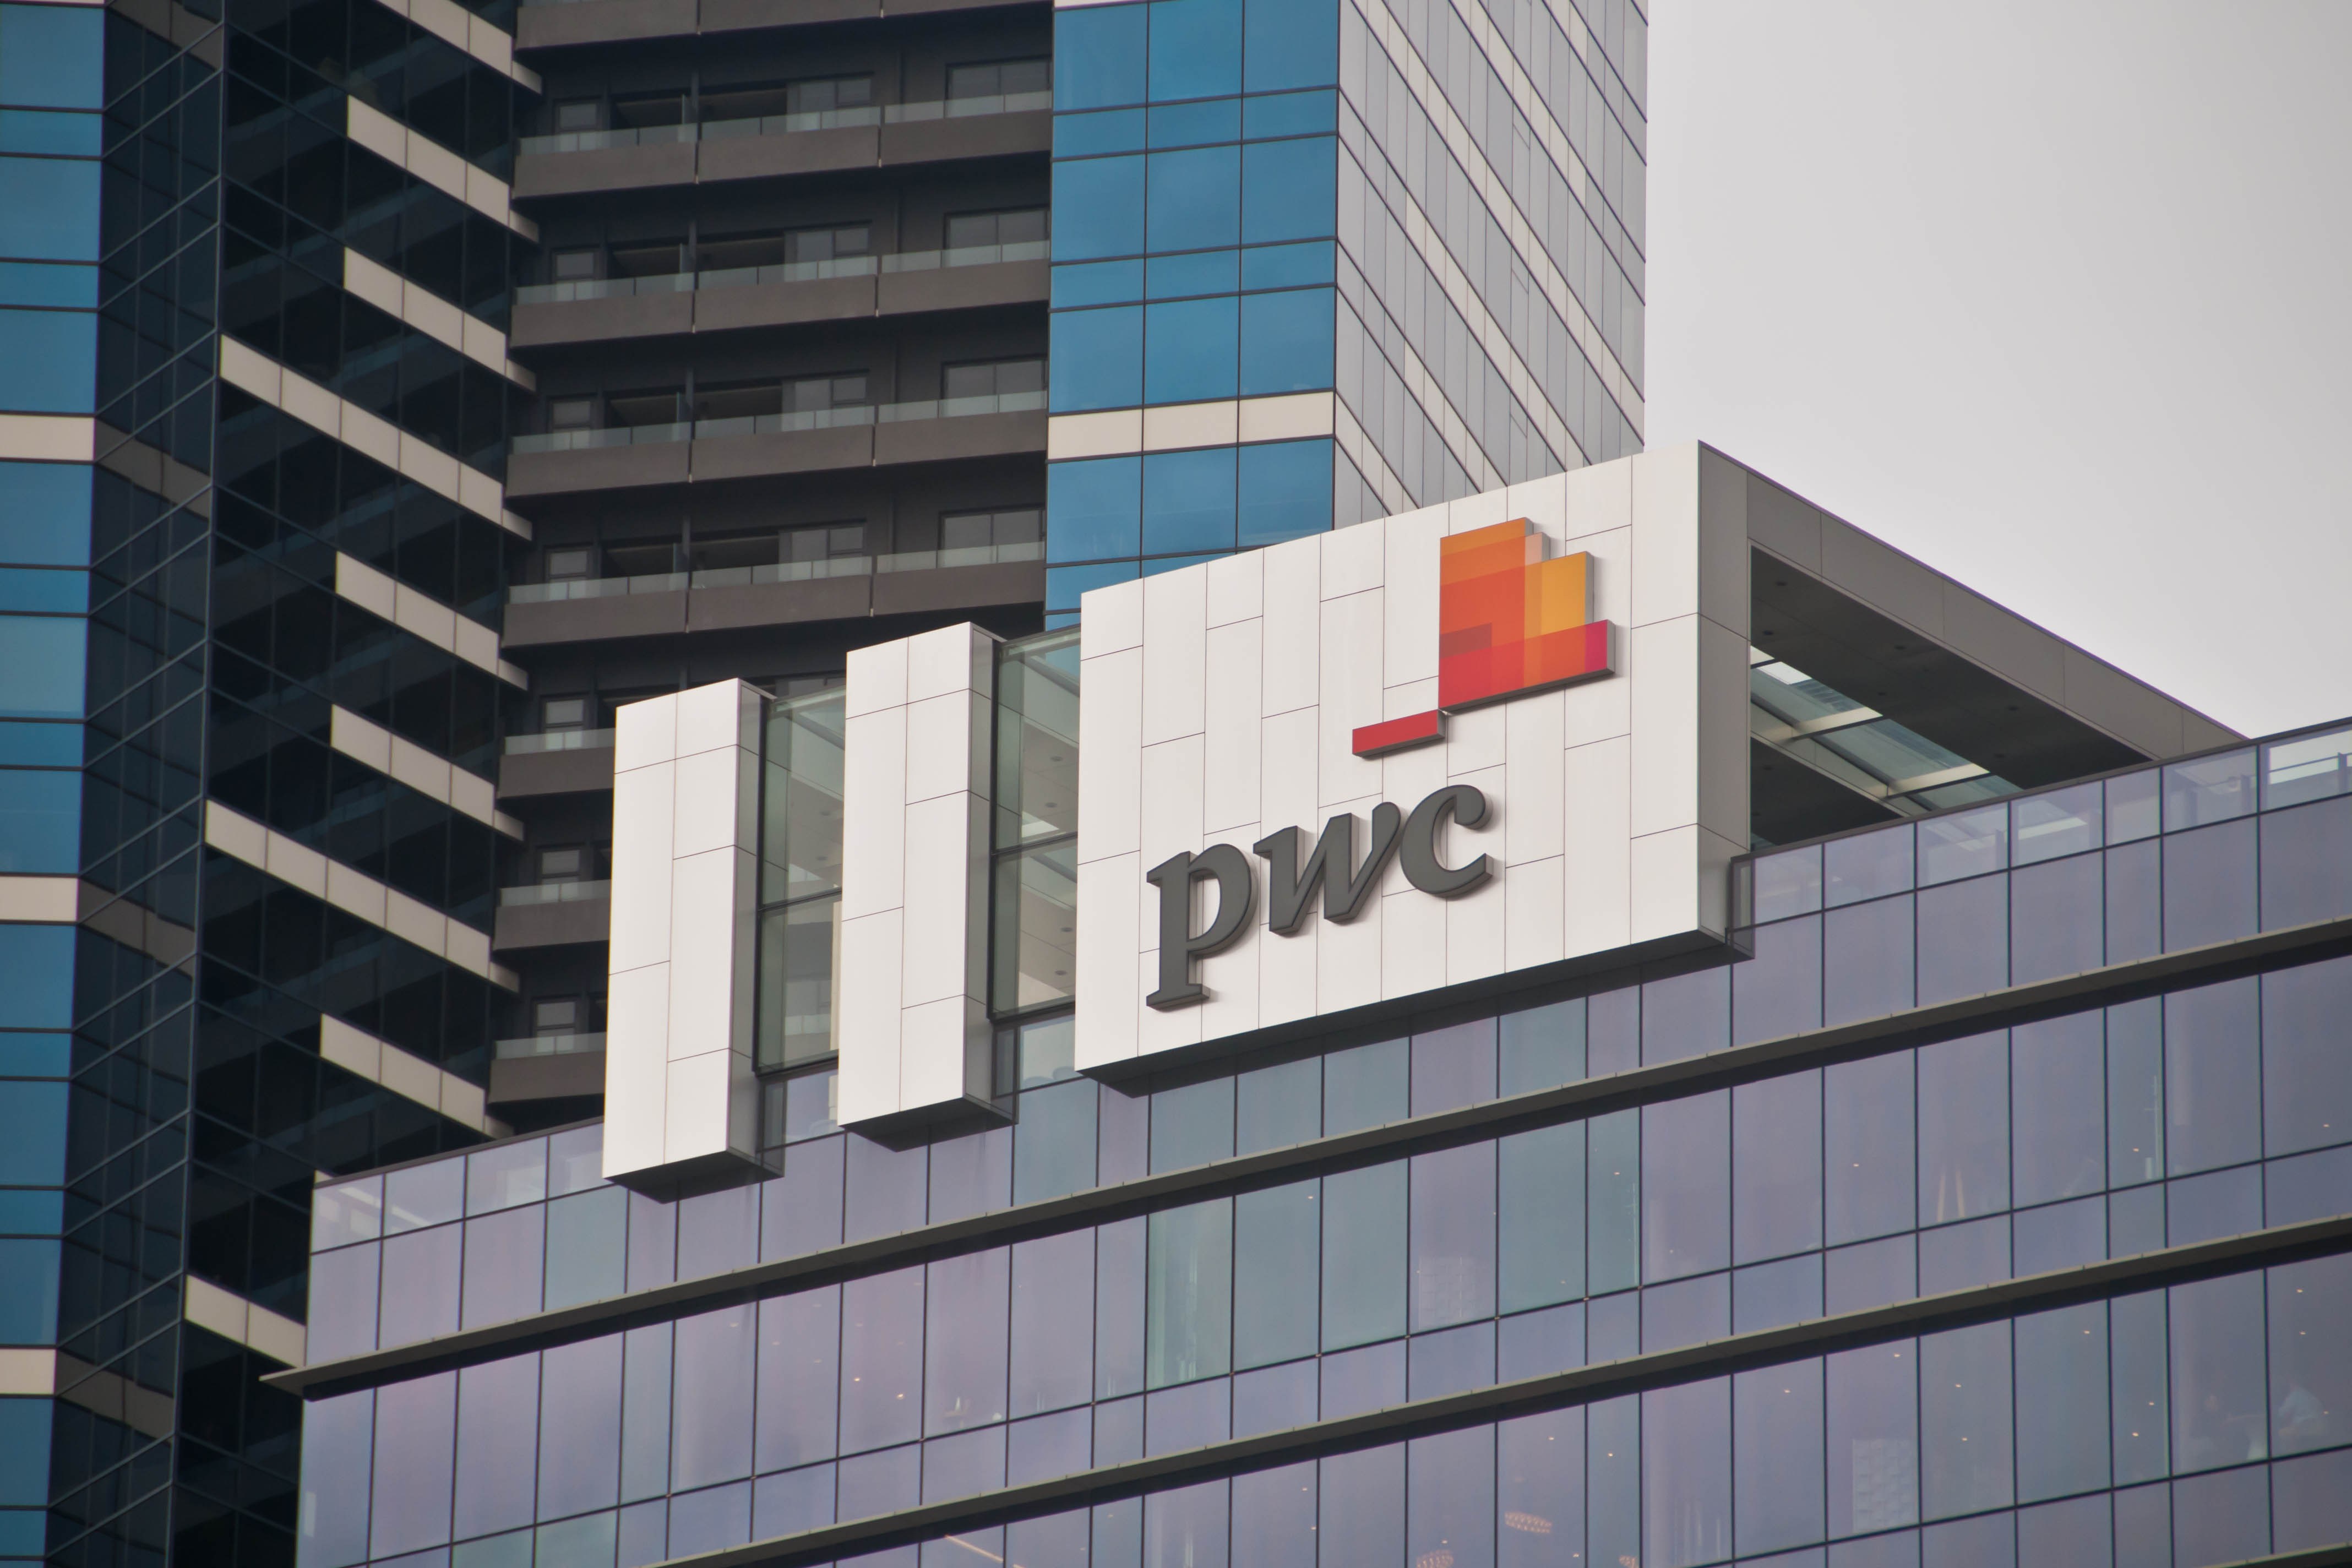 Partners at PwC will vote to decide who their next leader will be